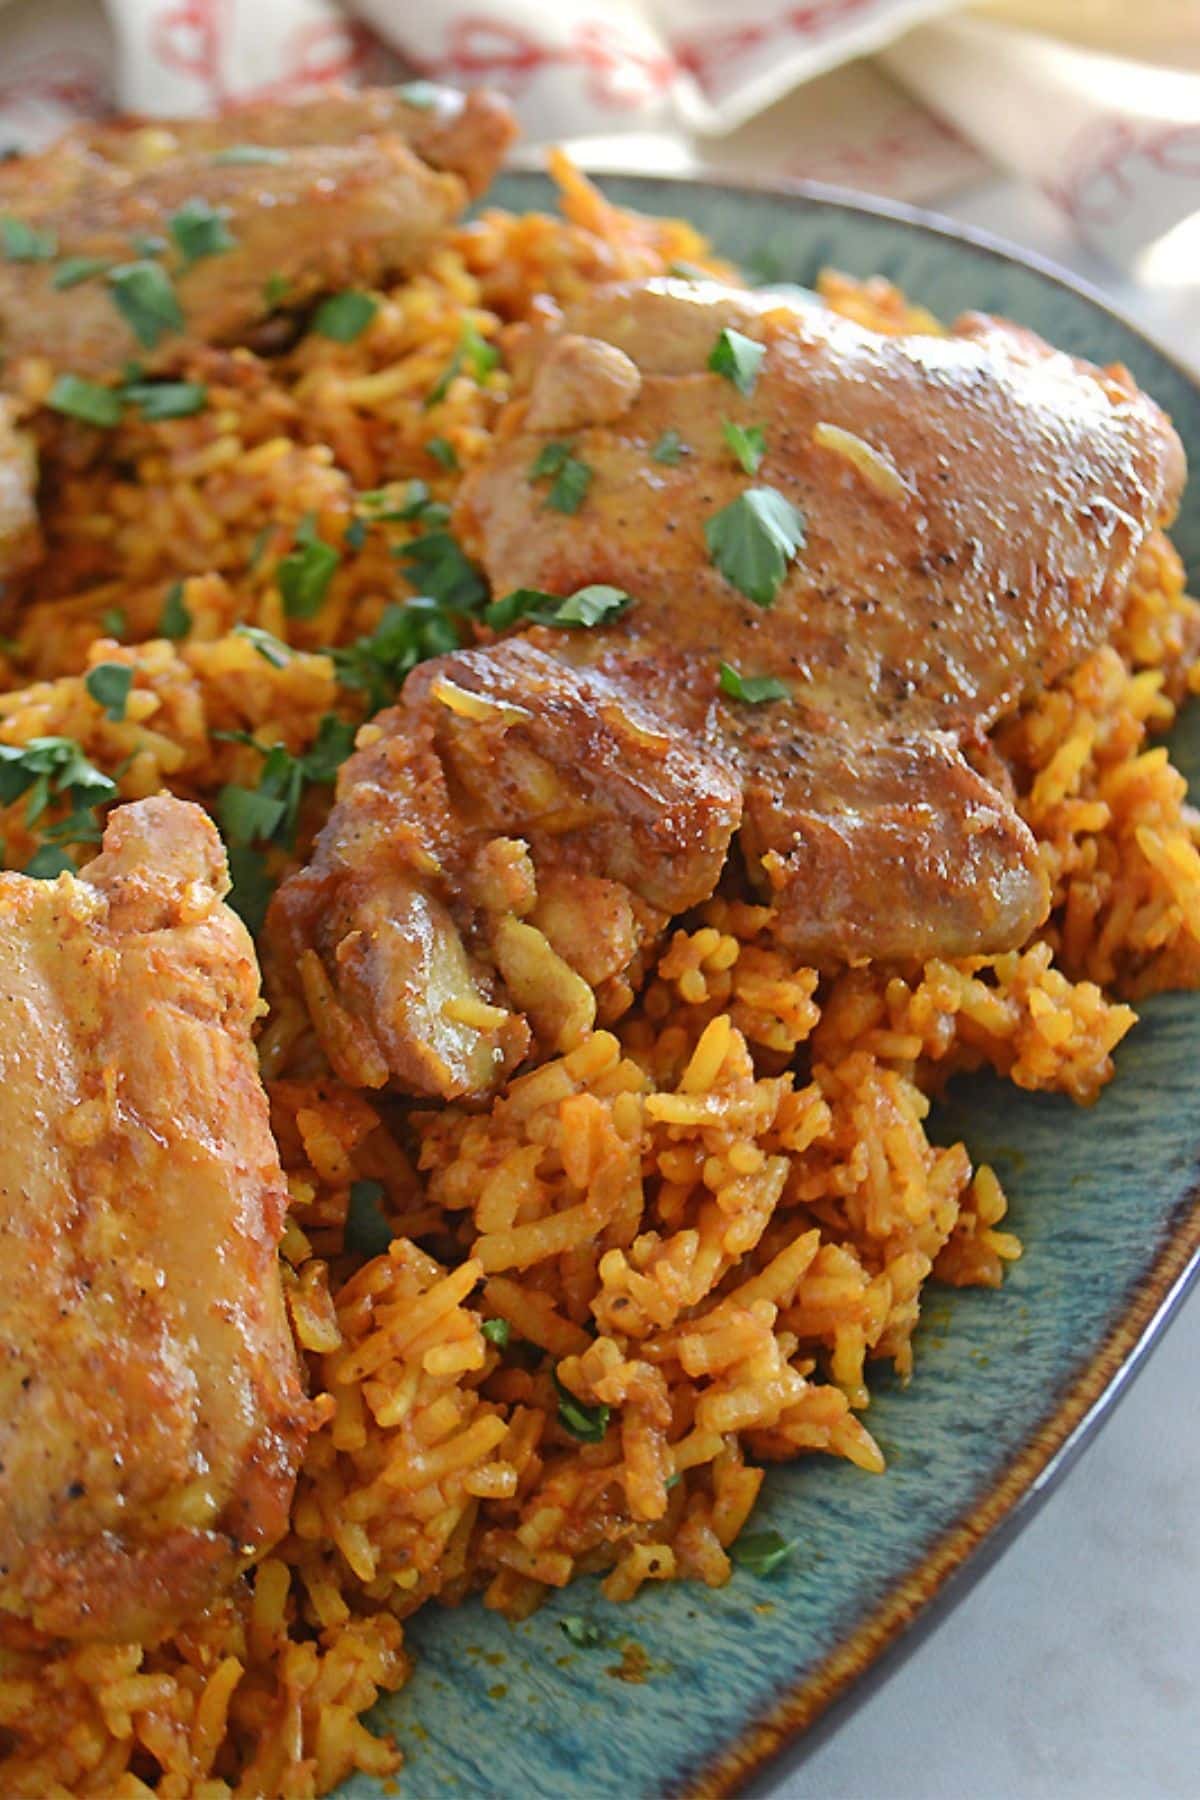 A side view of a big kabsa platter garnished with chopped parsley.